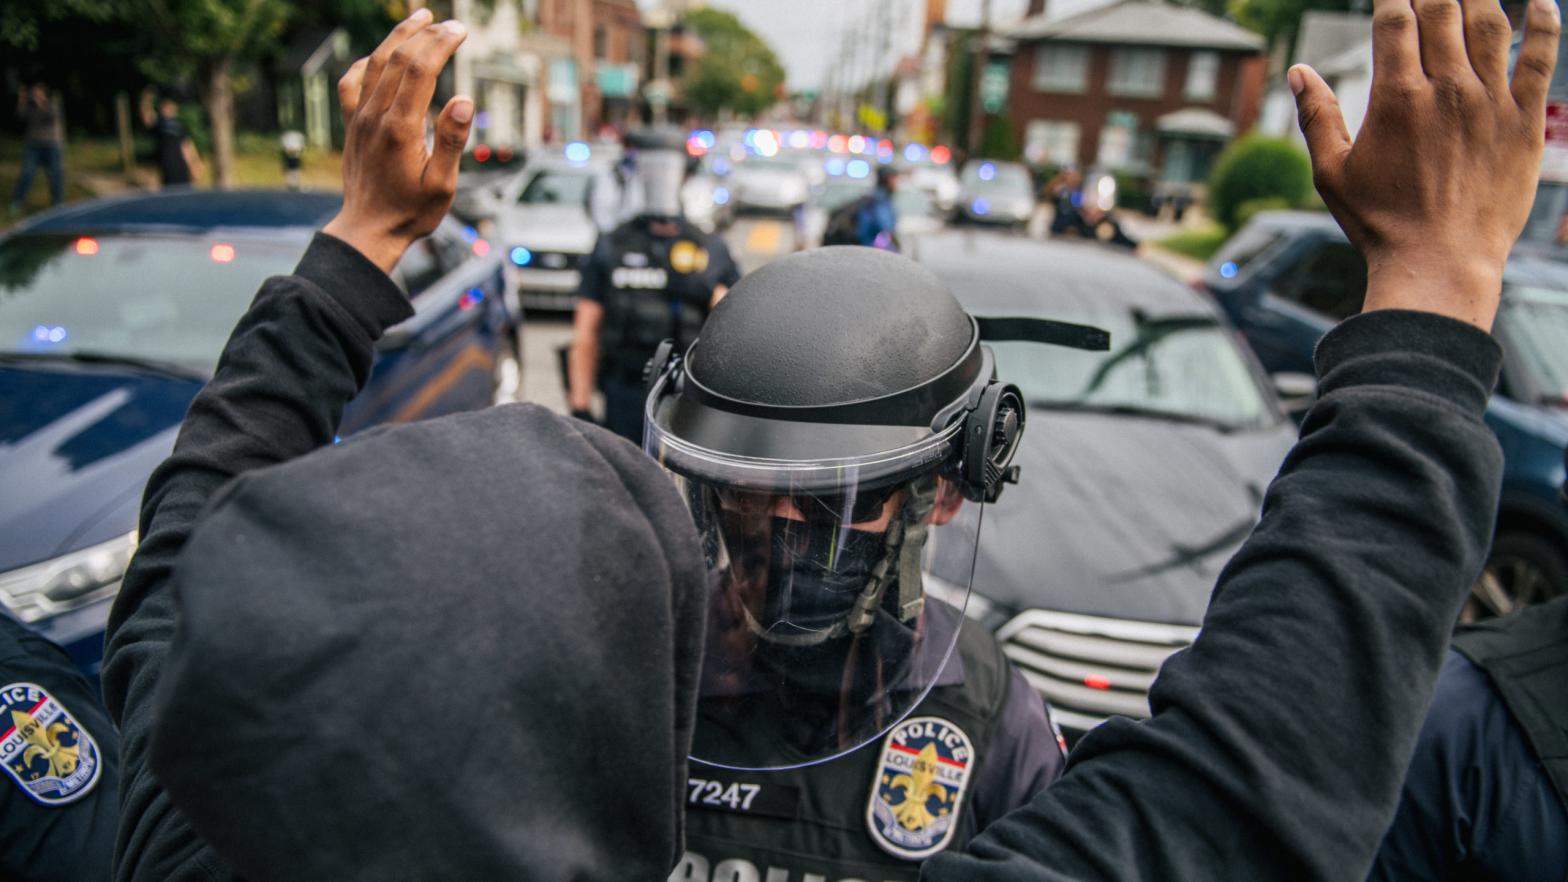 A protester raises his hands in the air during a standoff with law enforcement on September 23, 2020, in Louisville, Kentucky. Protesters marched after a Kentucky Grand Jury indicted one of the three officers involved in the killing of Breonna Taylor with wanton endangerment. Taylor was fatally shot by Louisville Metro Police officers during a no-knock warrant at her apartment on March 13, 2020, in Louisville, Kentucky. (Photo: Brandon Bell , Getty Images)